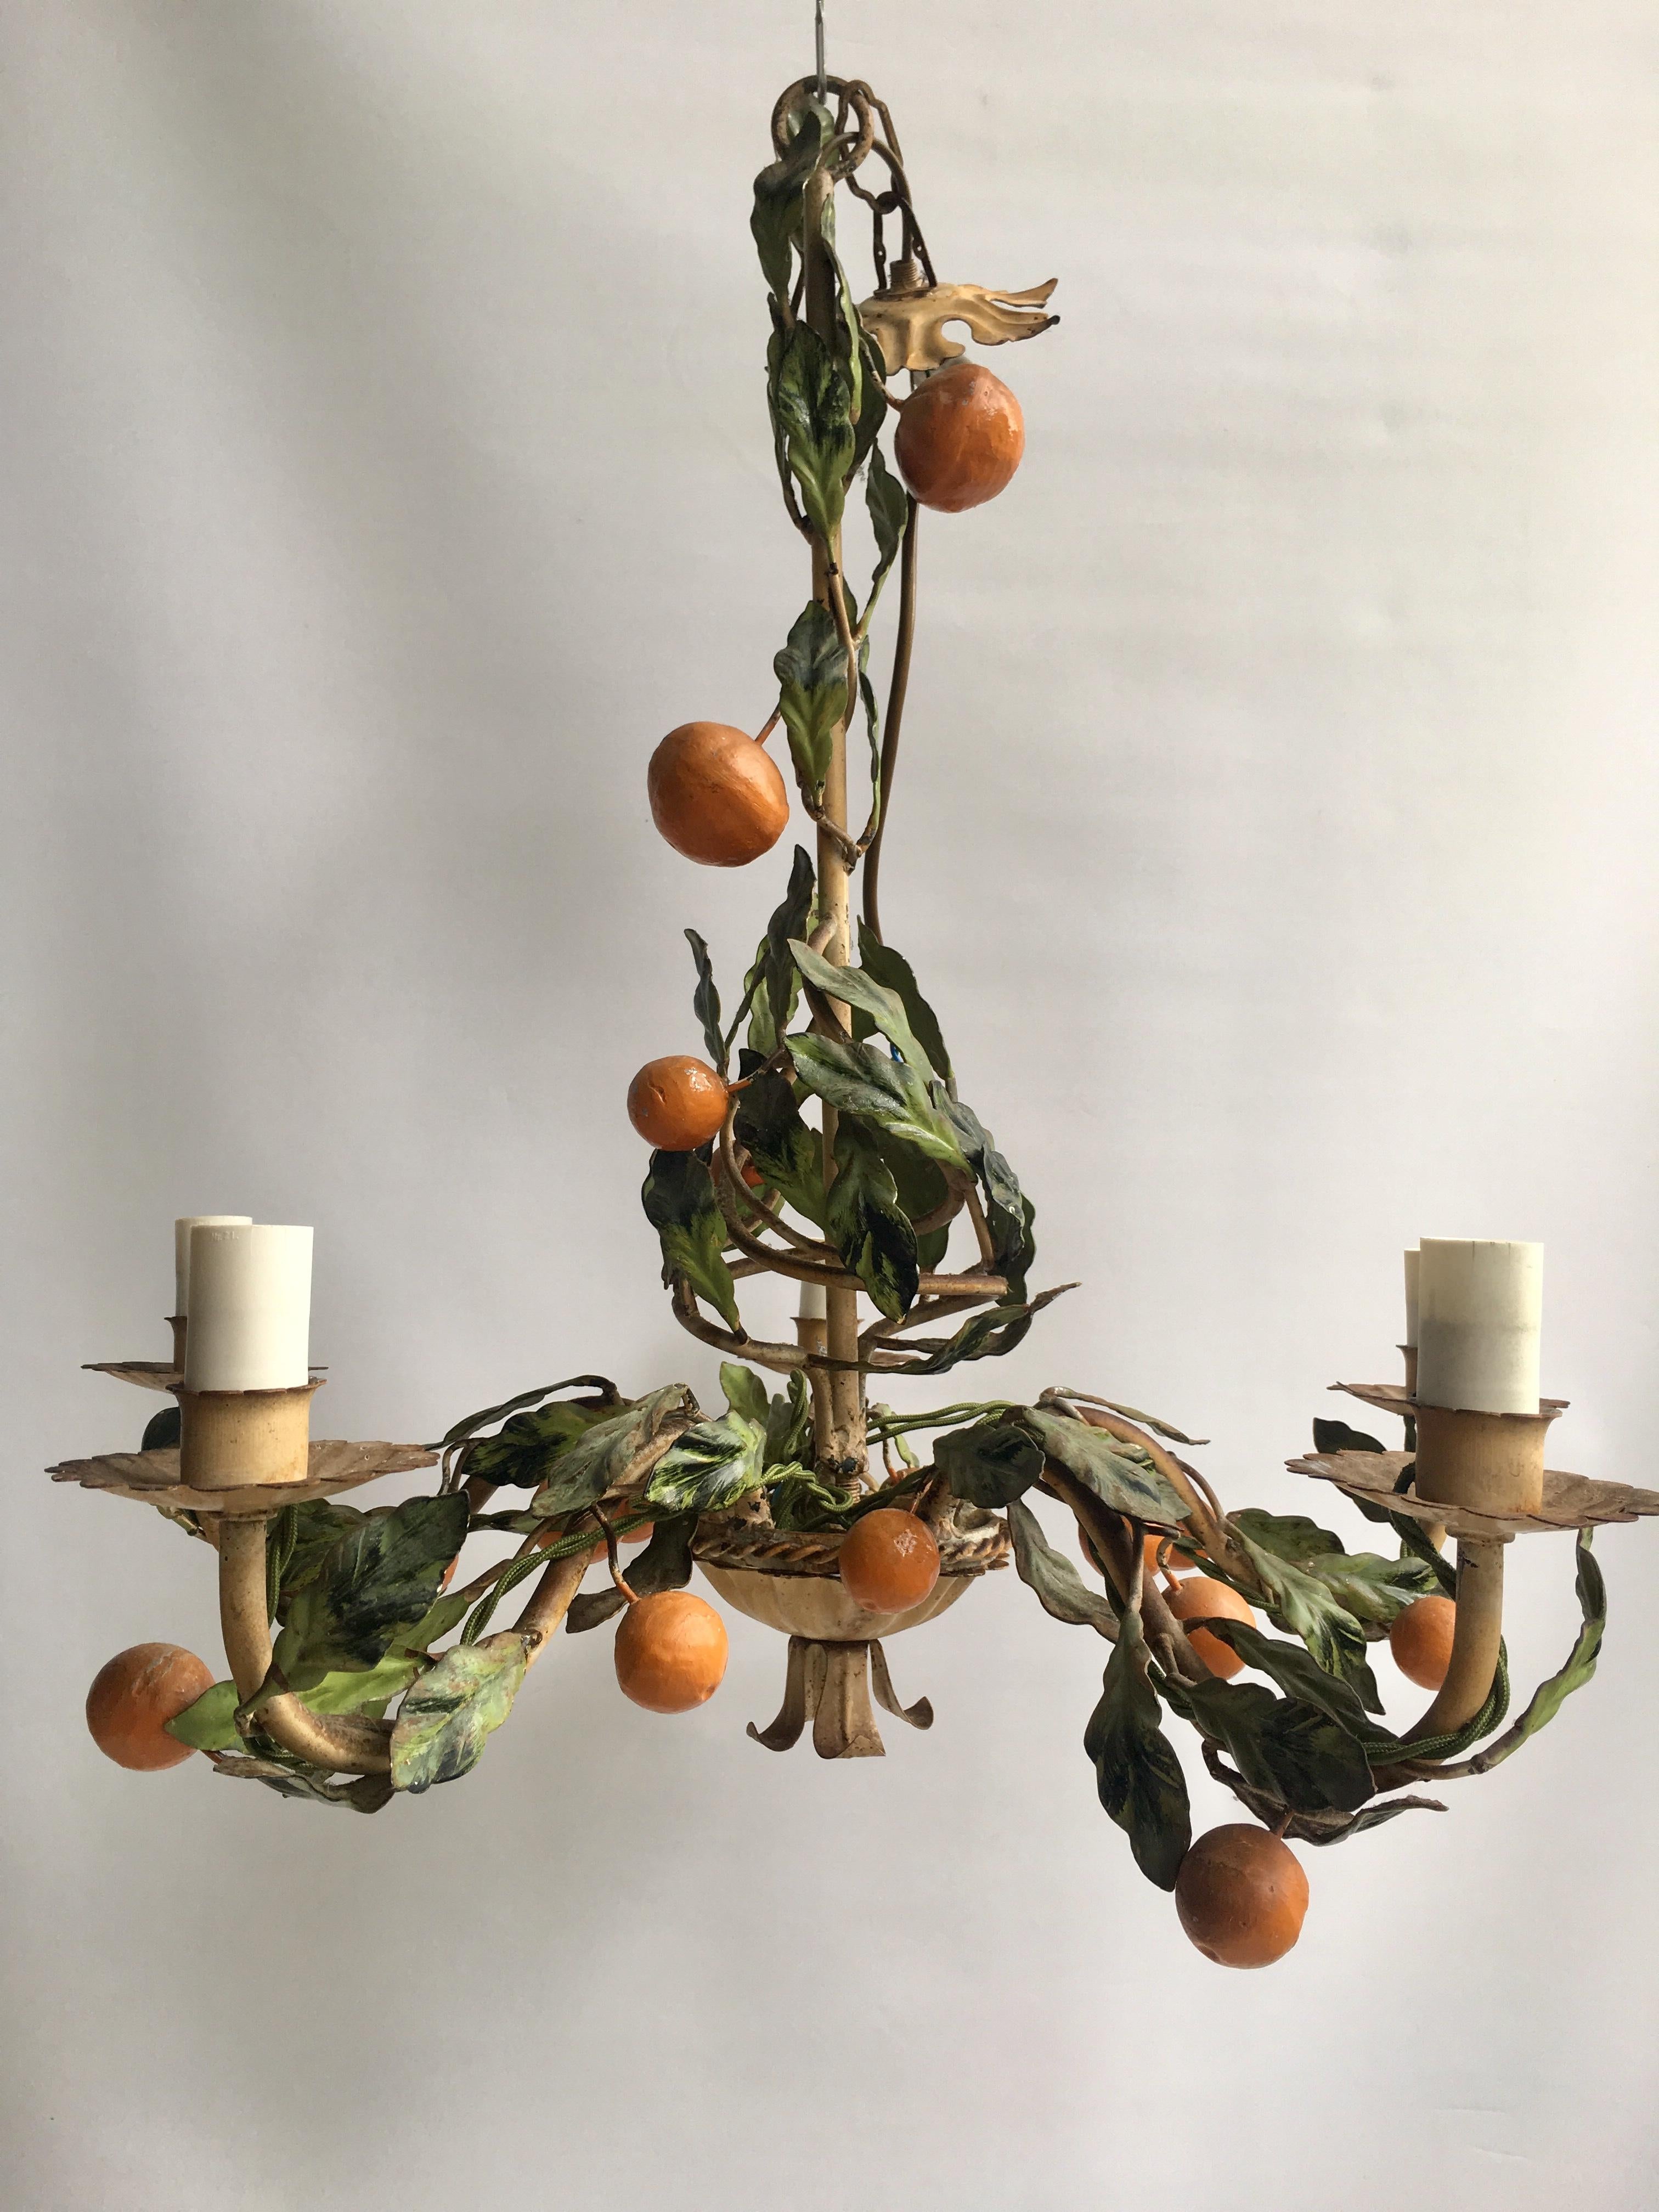 Beautiful Italian hand-painted orange tole light, circa1940s

The light has 5 bulb holders and its original chain and rose

Measures: 56cm tall base to top ring (additional length with chain), 54cm across